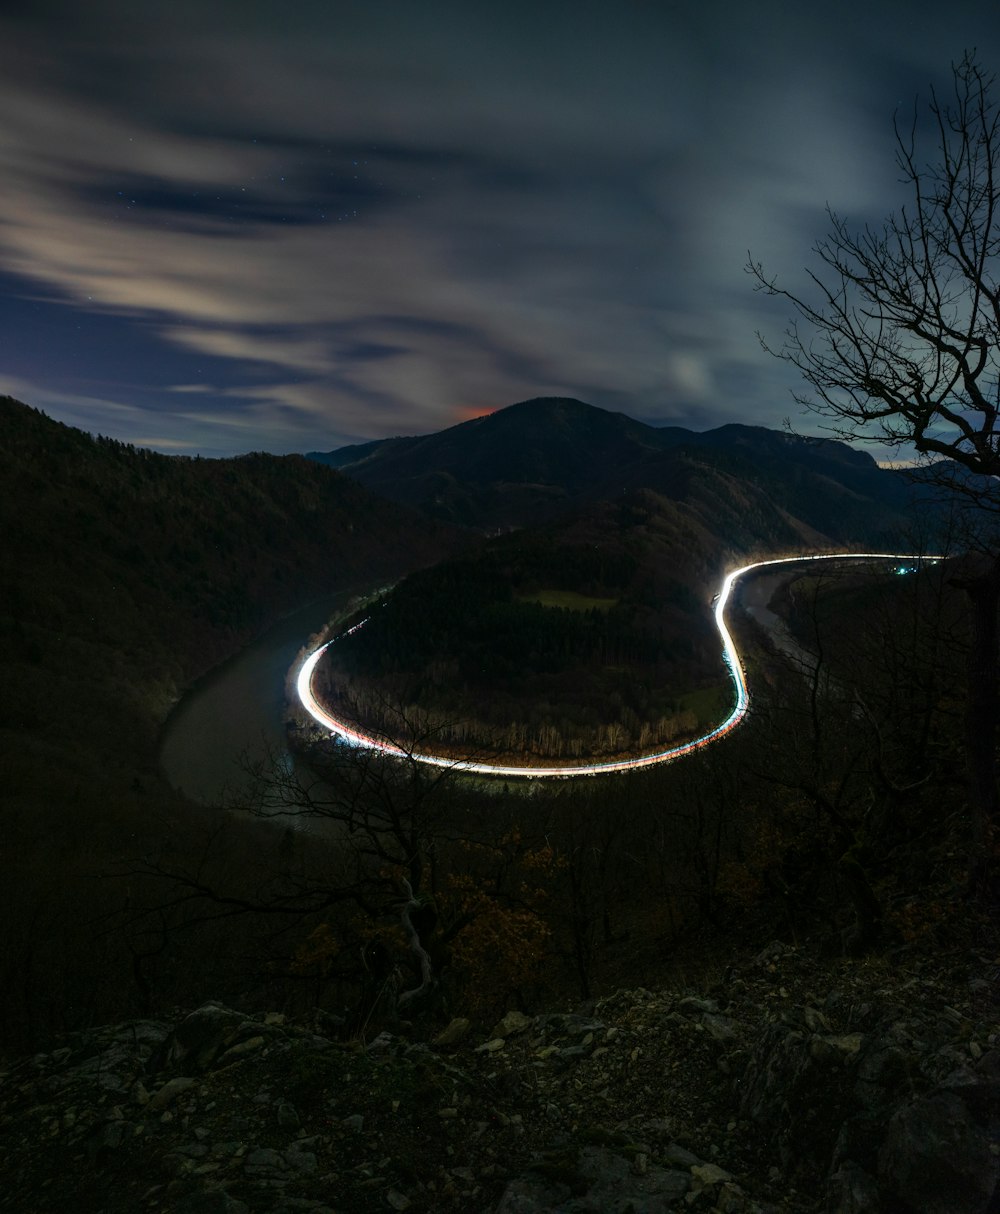 a long exposure photo of a winding road at night